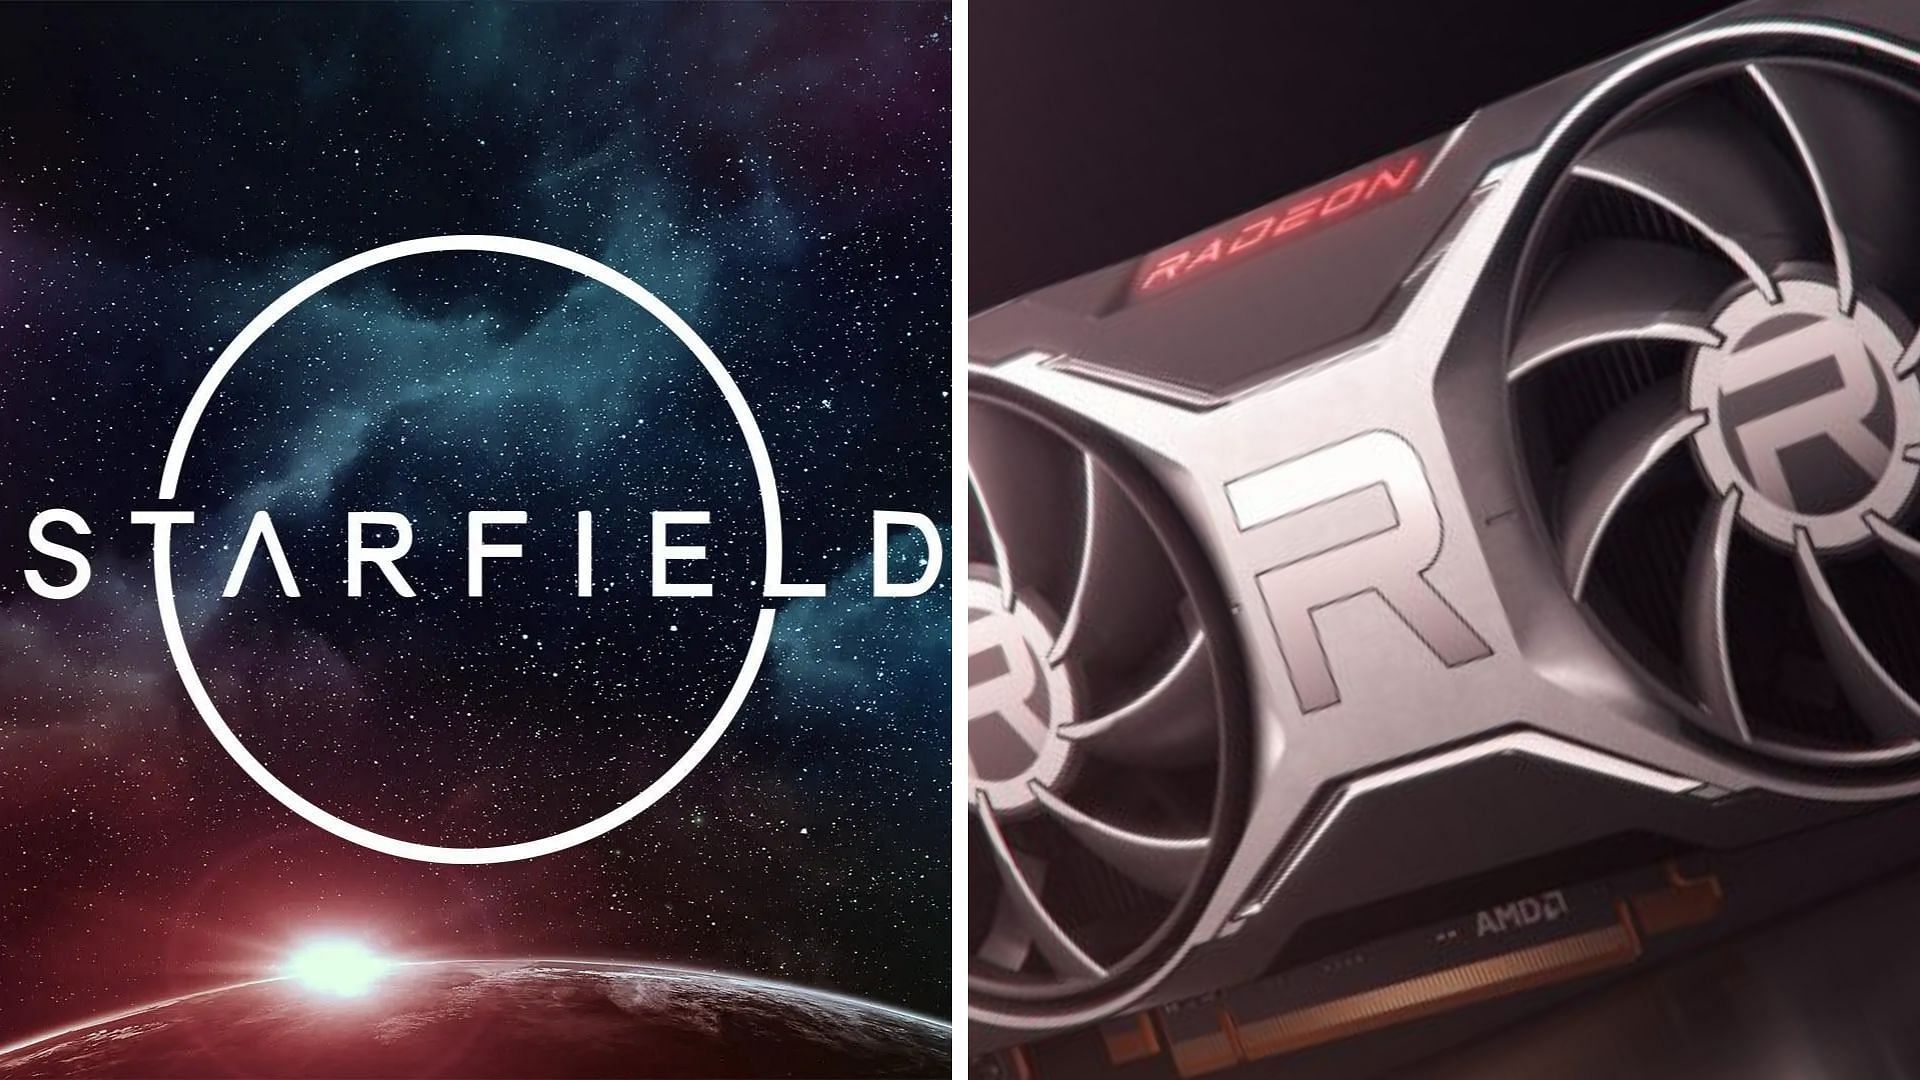 Starfield is playable on the new RX 6700 XT and RX 6750 XT GPUs (Image via AMD and Xbox)